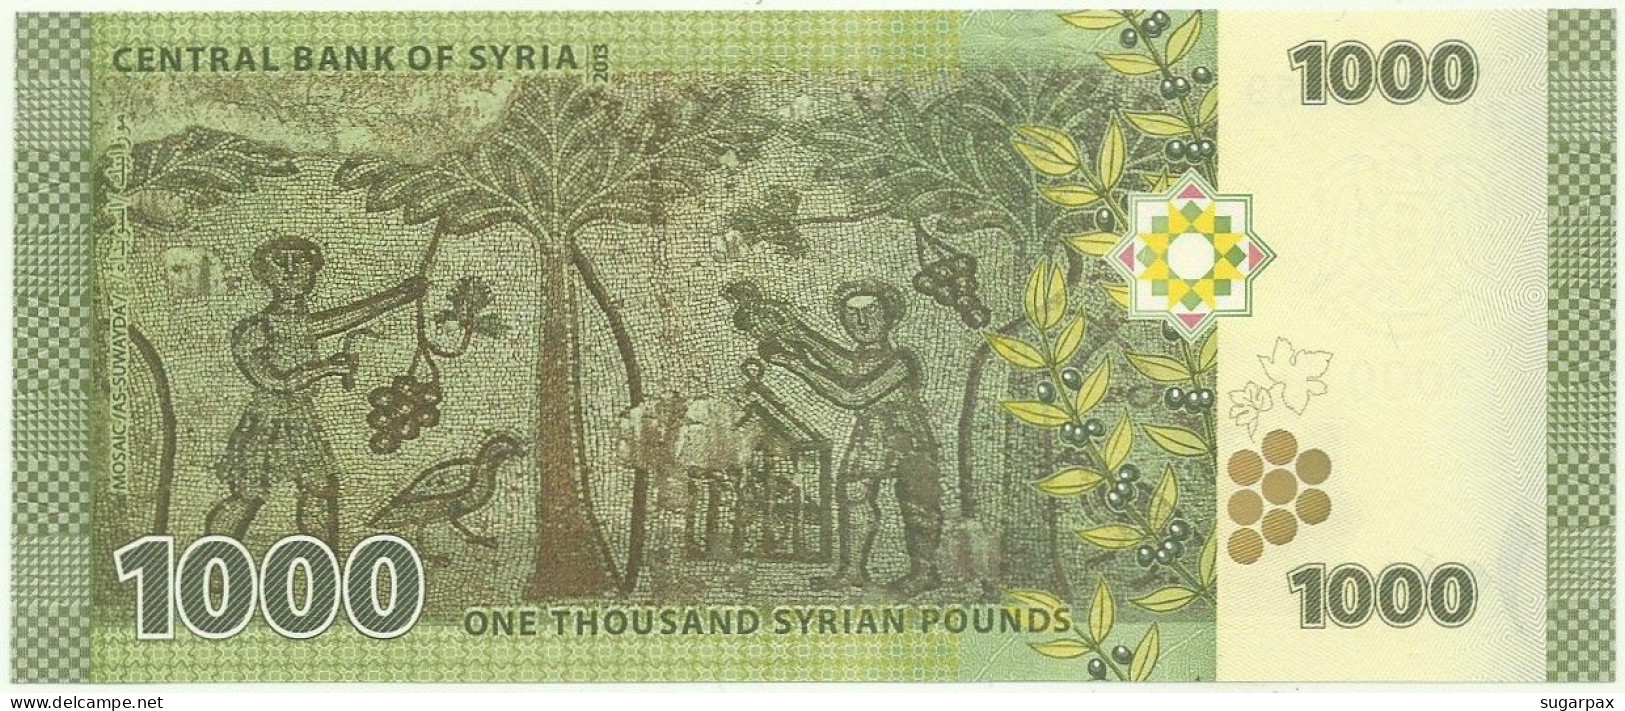 Syria - 1000 Syrian Pounds - 2013 / AH 1434 - Pick 116 - Unc. - Serie A/21 - 1.000 - Syria